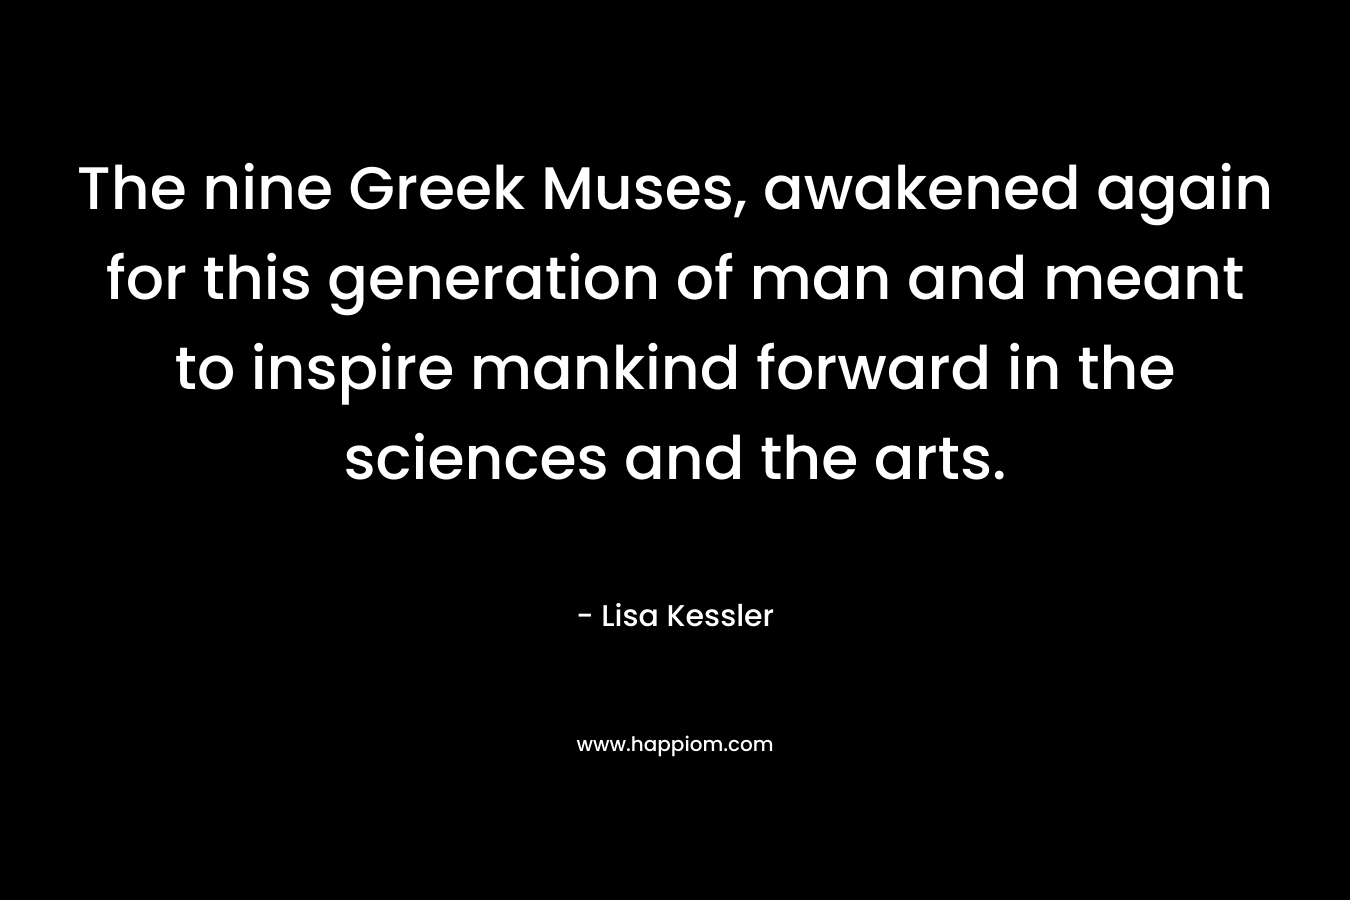 The nine Greek Muses, awakened again for this generation of man and meant to inspire mankind forward in the sciences and the arts.